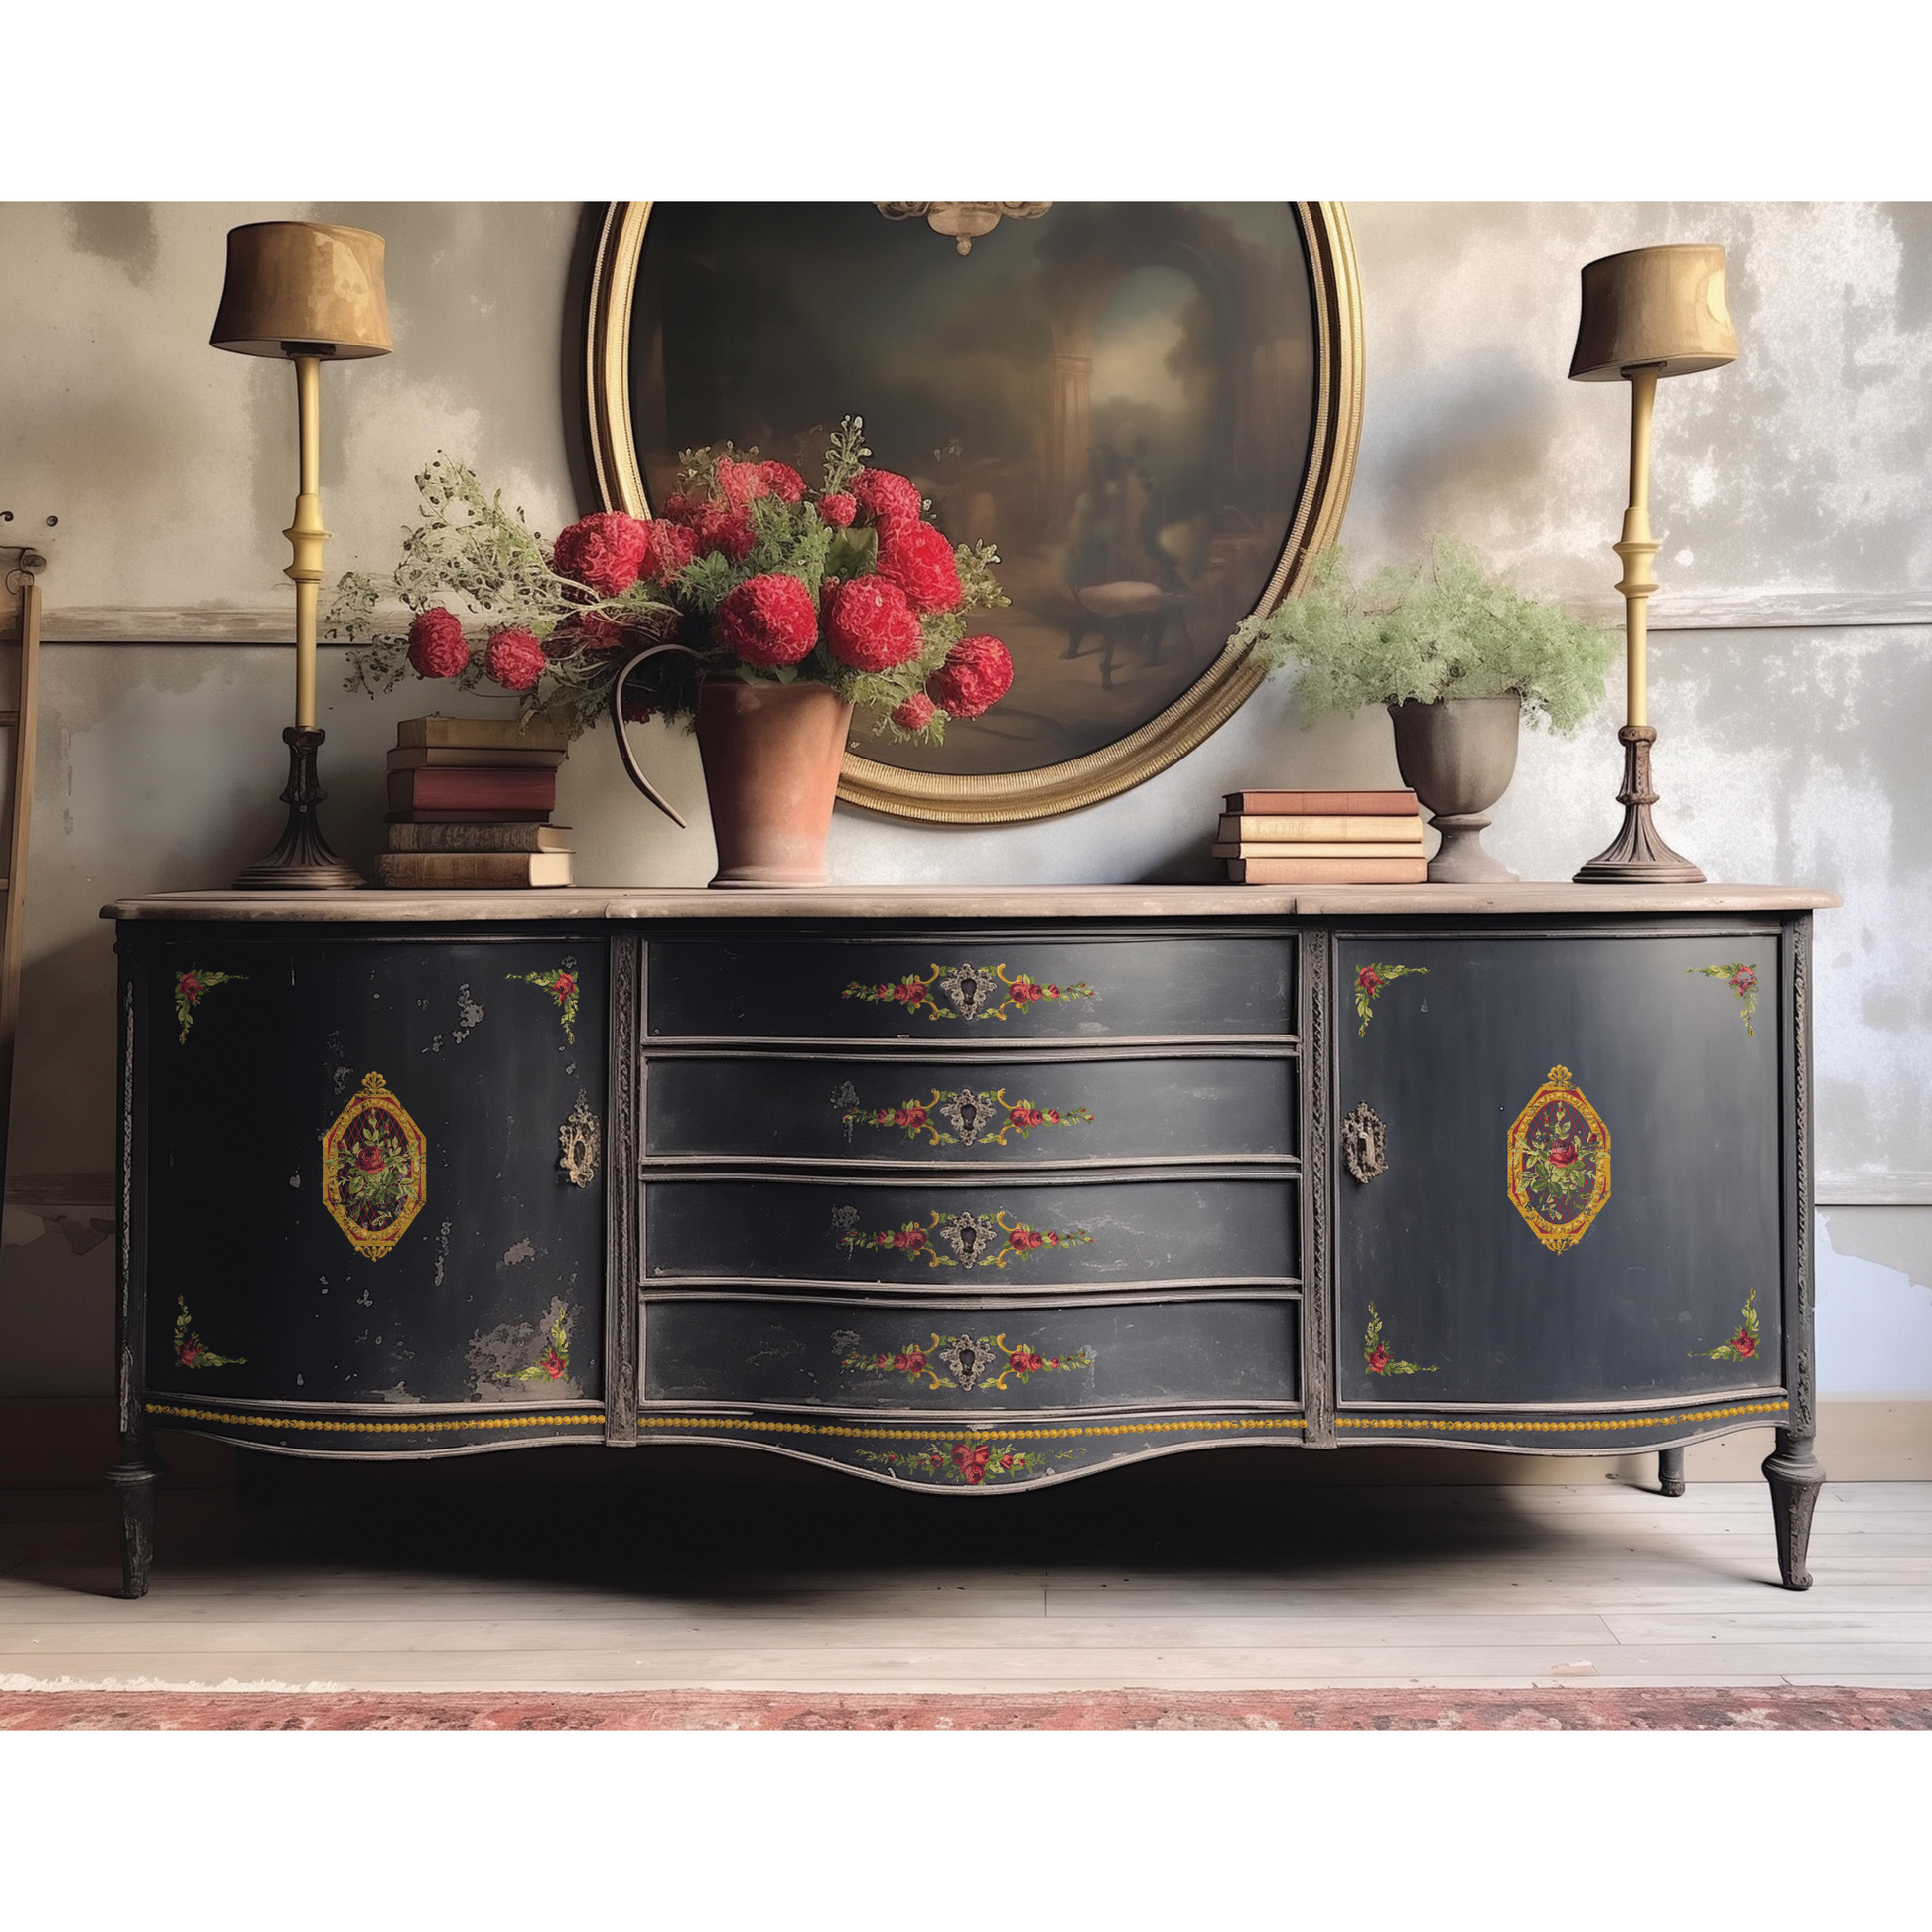 "Petite Fleur Red" Paint Inlay IOD Furniture Transfer by Iron Orchid Designs.  Four 12" x 16" sheets. Example pic-black buffet. Available at Milton's Daughter.